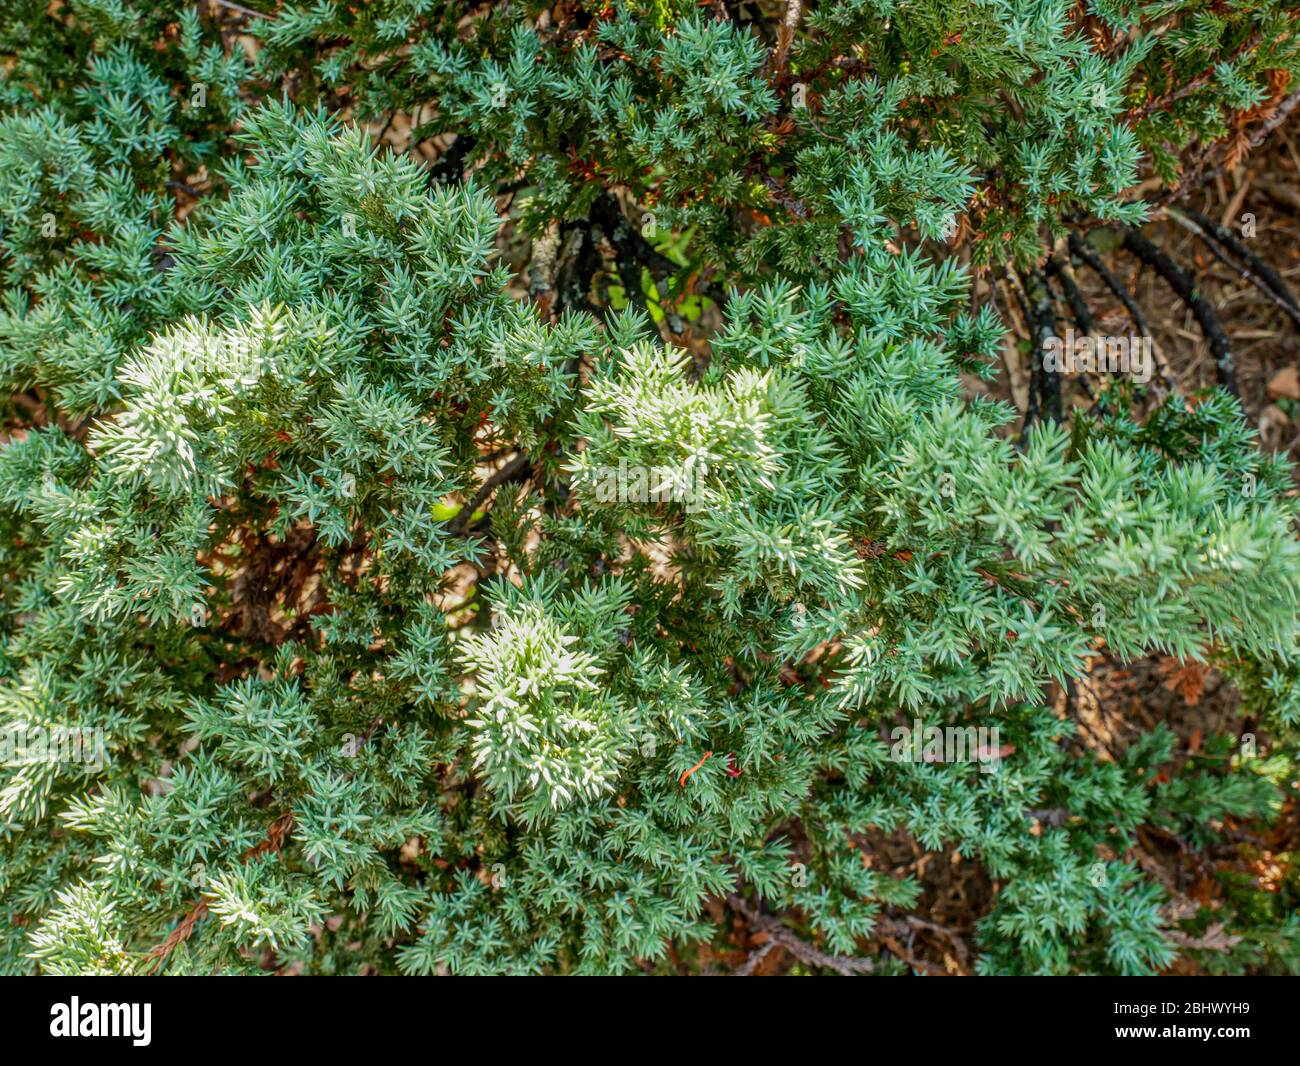 Mexican Pinyon tree in outdoor garden.Bunch decoration autumn and winter season.Texture leaves nature Stock Photo